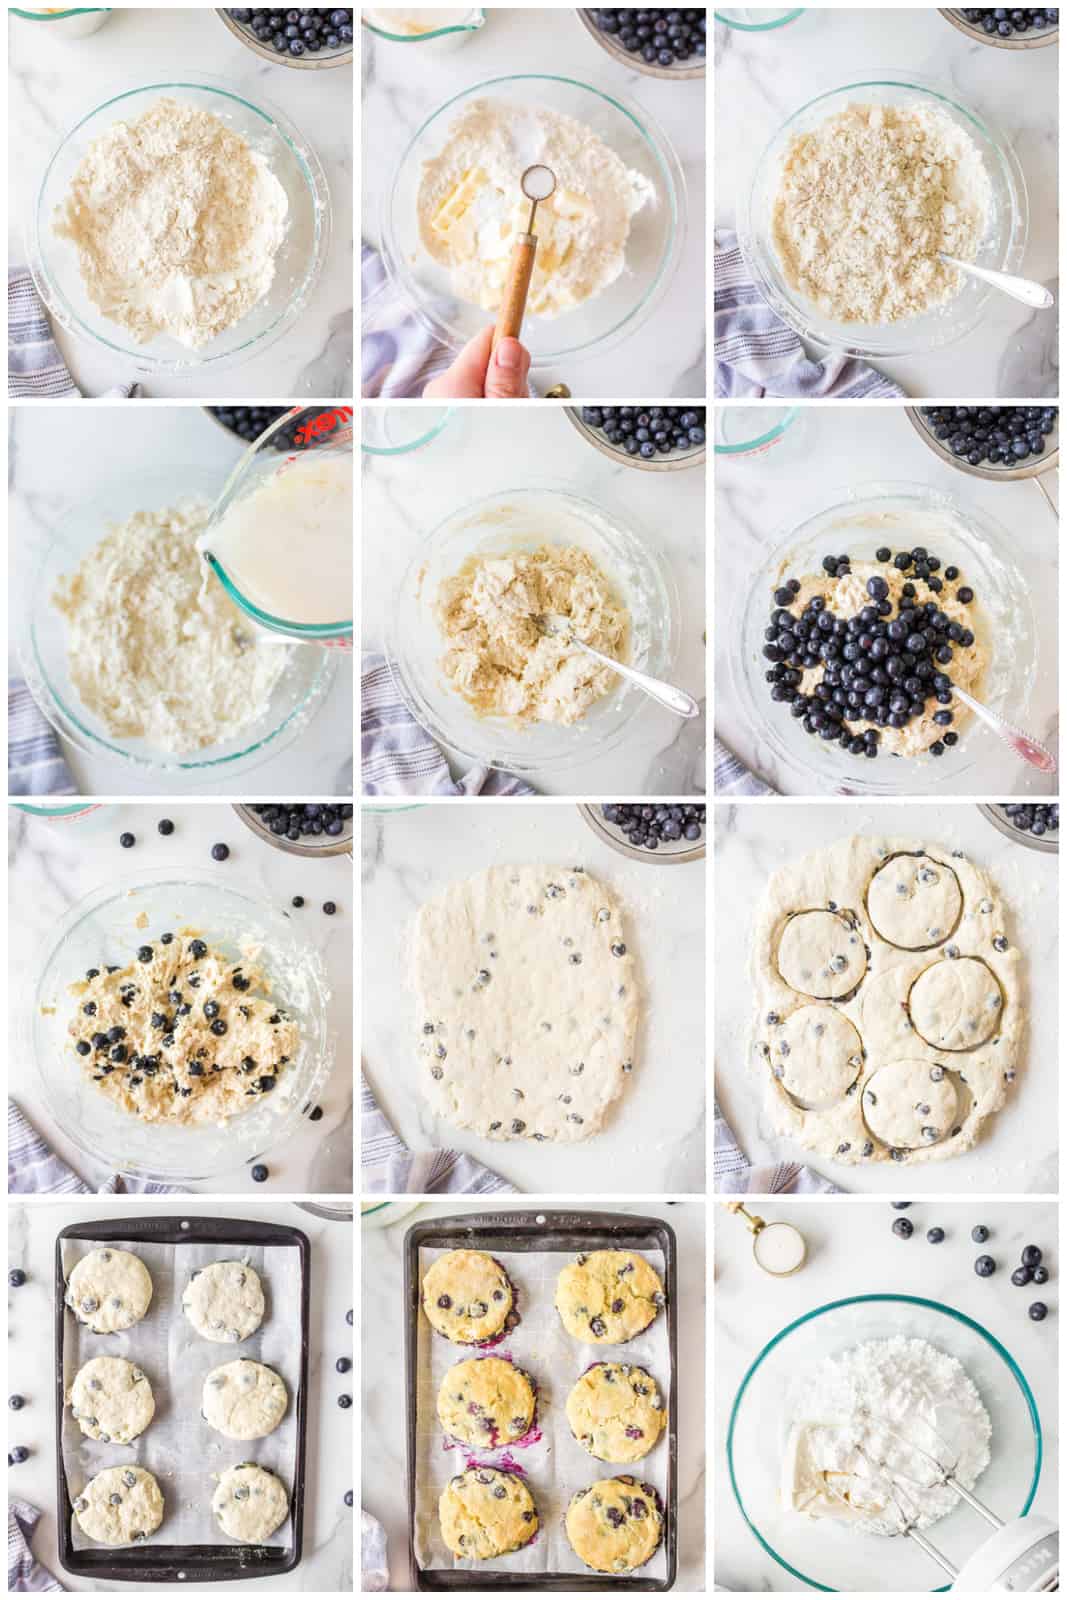 Step by step photos on how to make Blueberry Biscuits